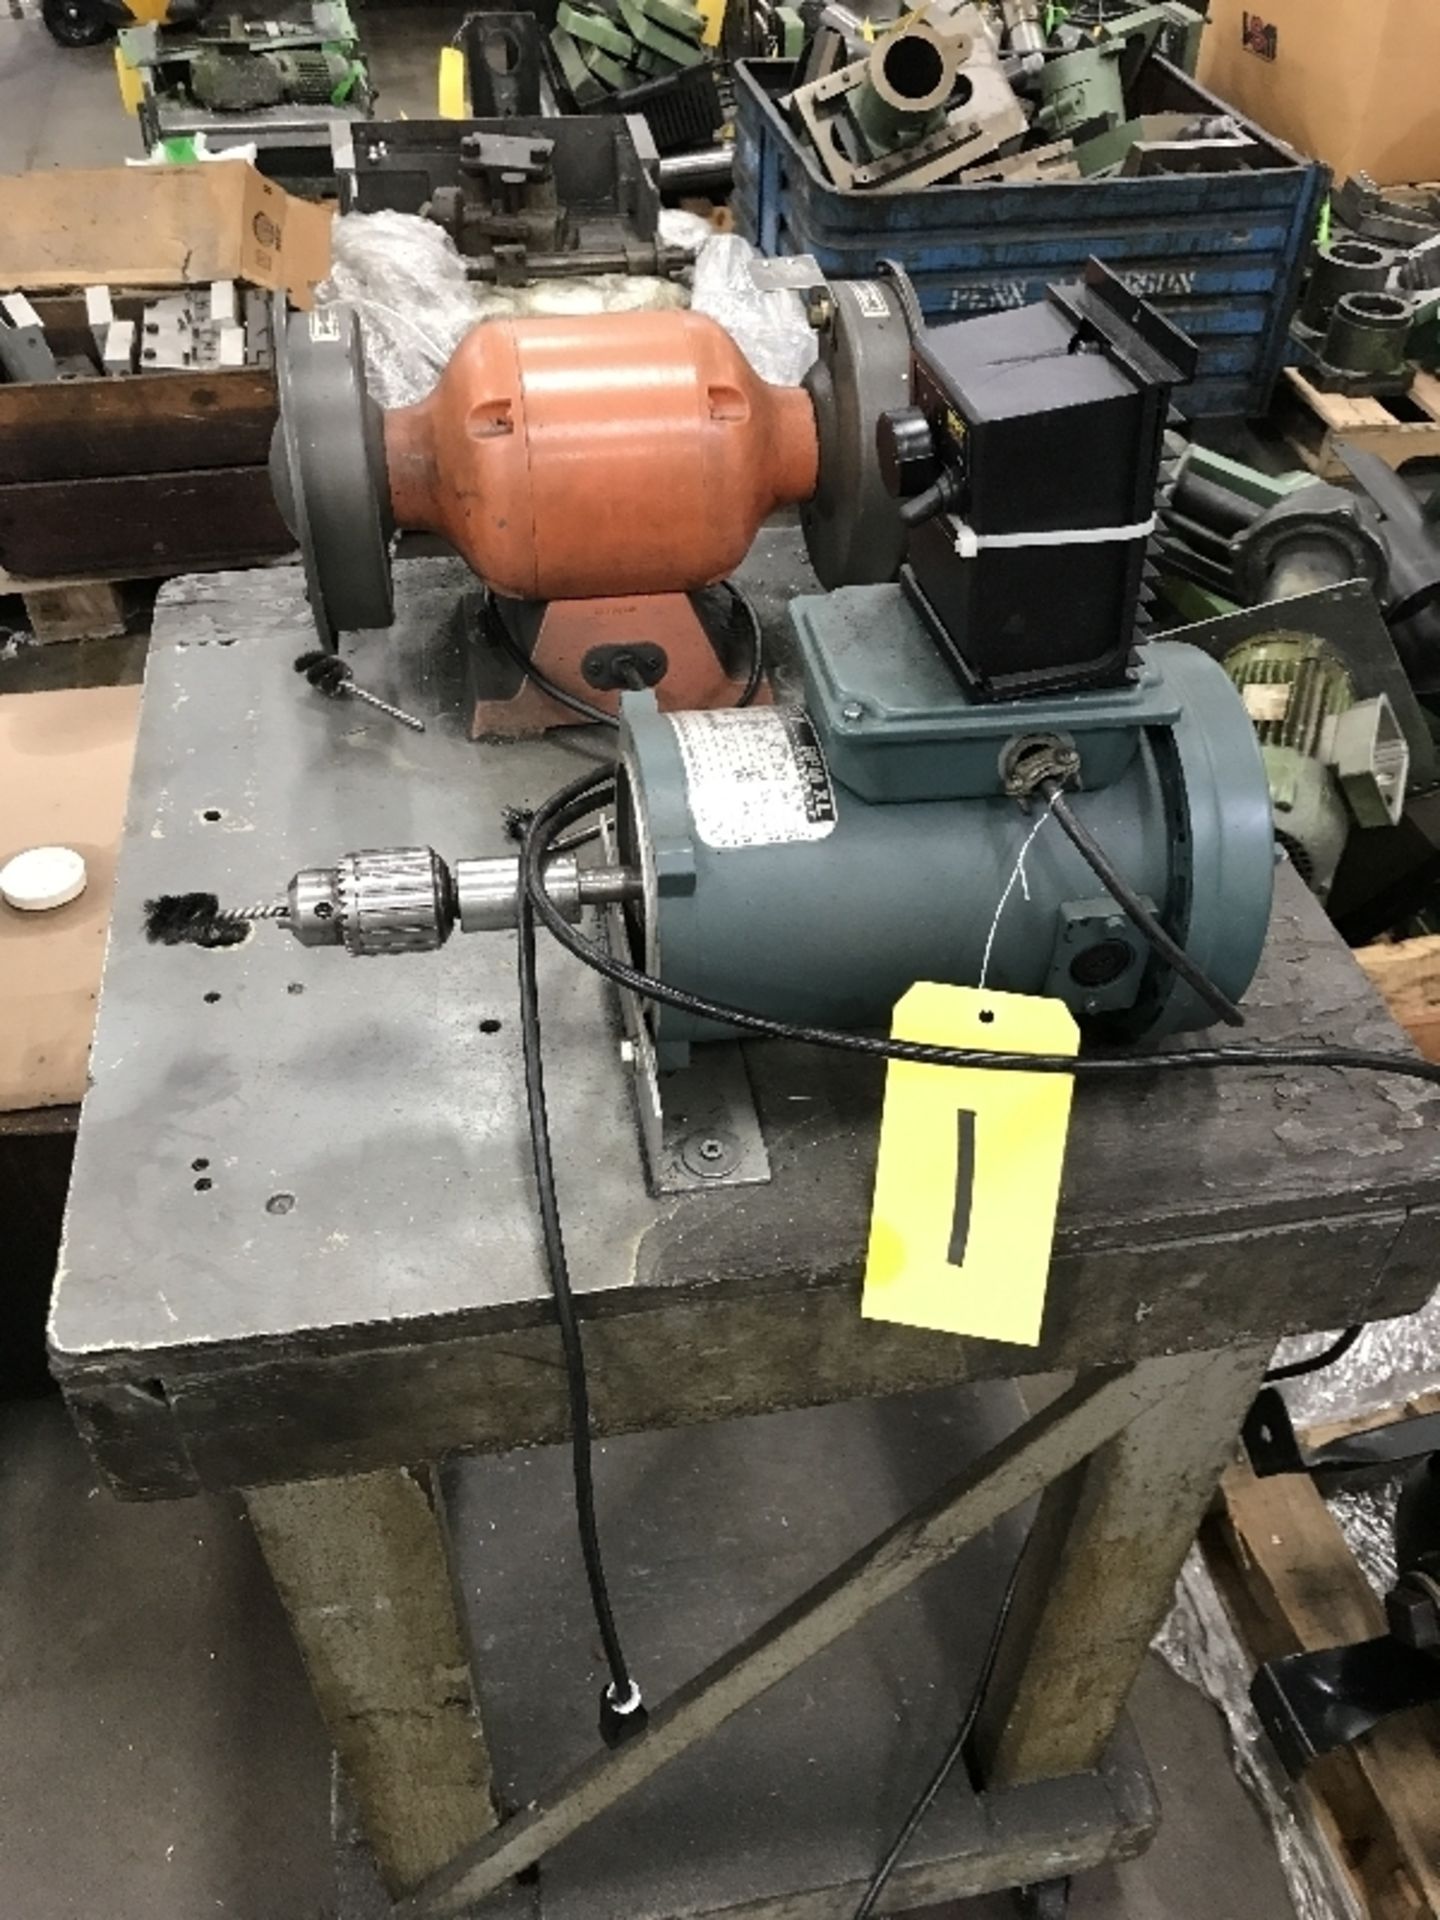 Bench Grinder & Drill Motor (Reliance Electric), 4-wheel Cart & contents